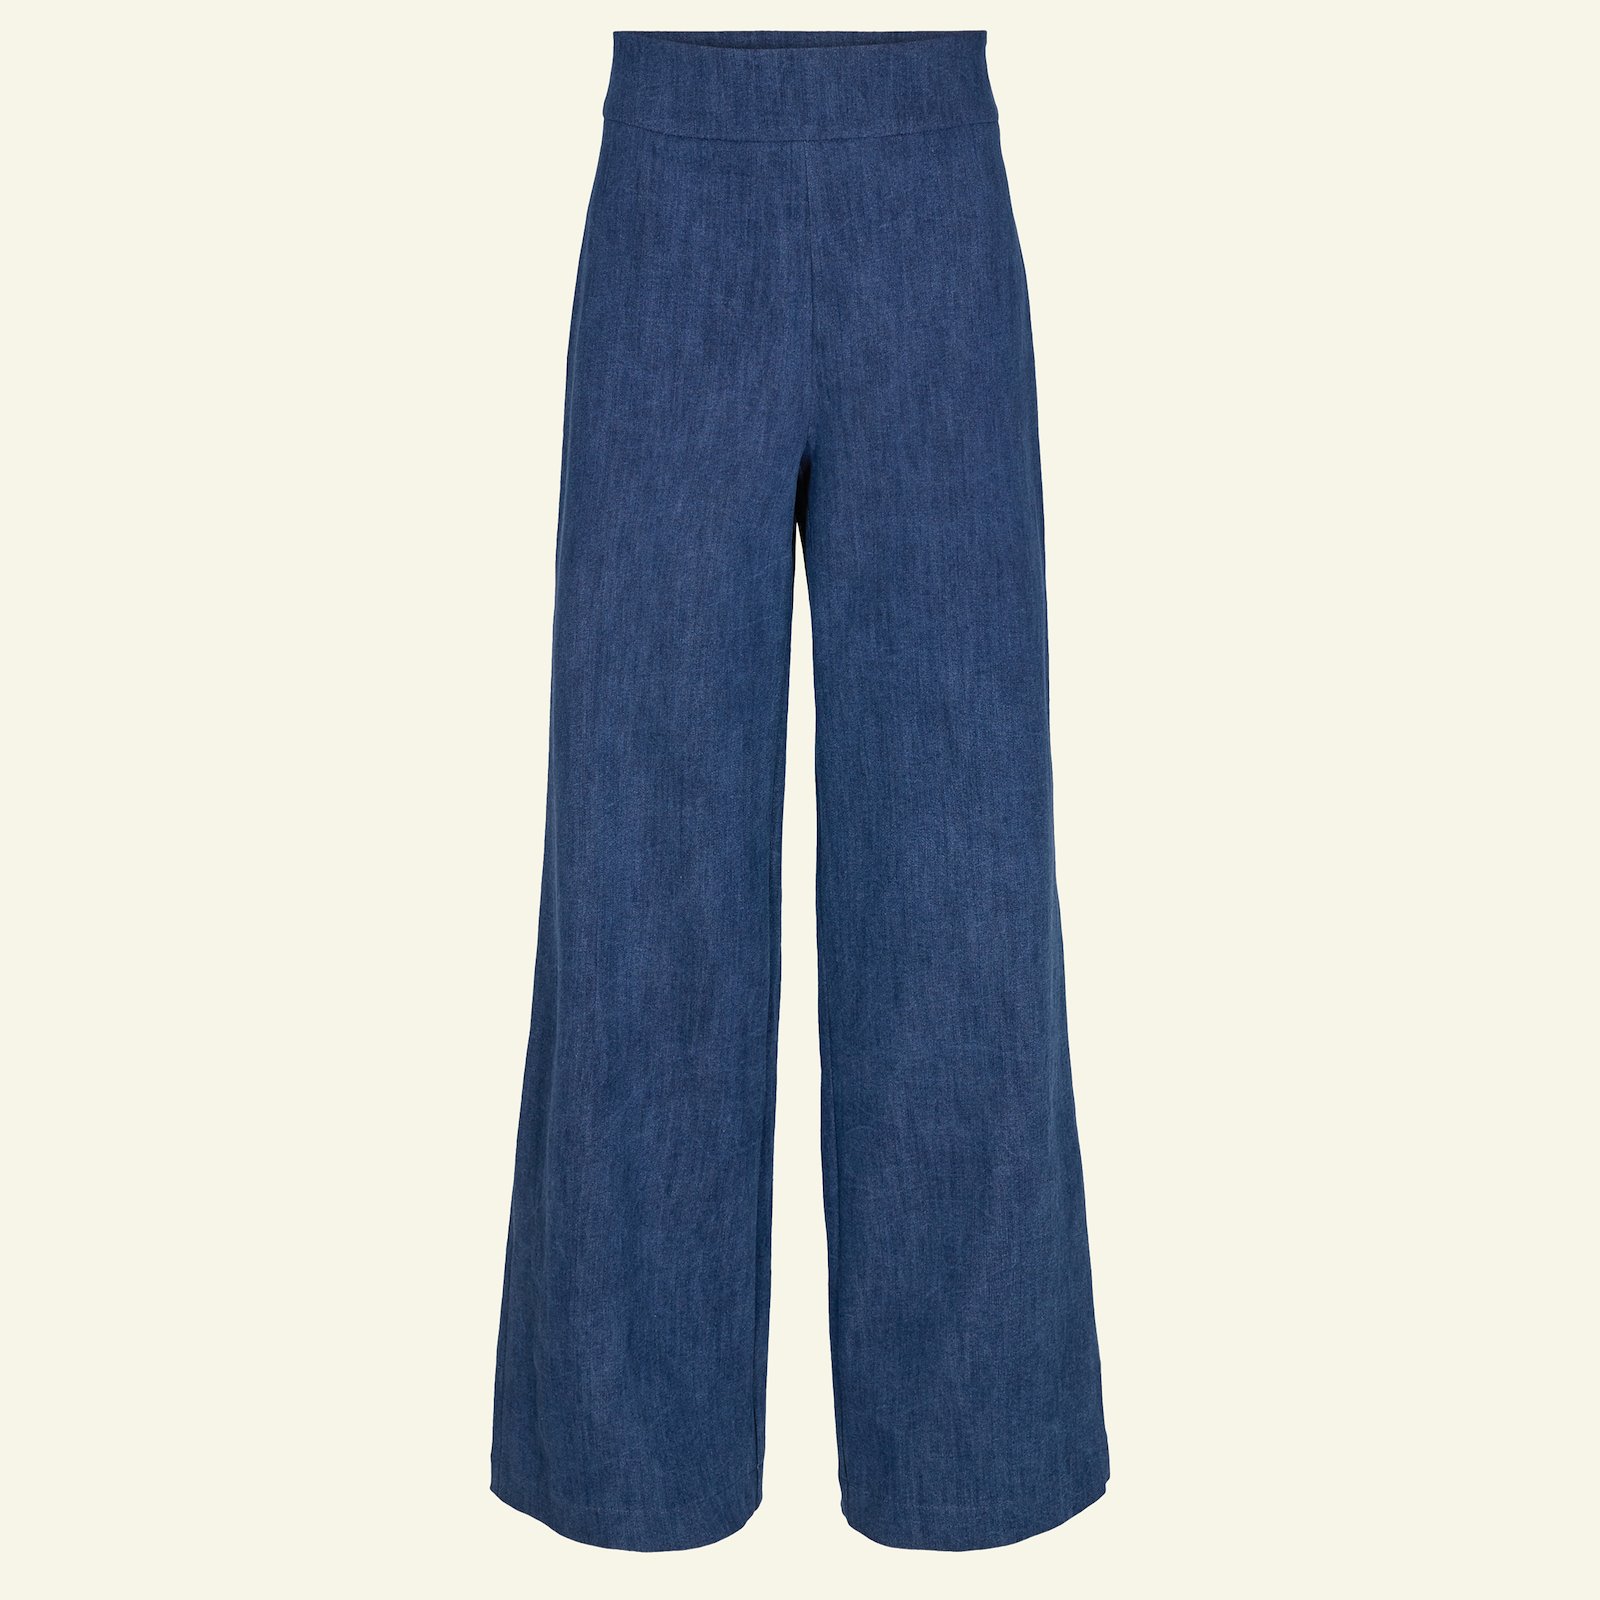 Highwaist and wide legs trousers, 38/10 p20052_460851_sskit